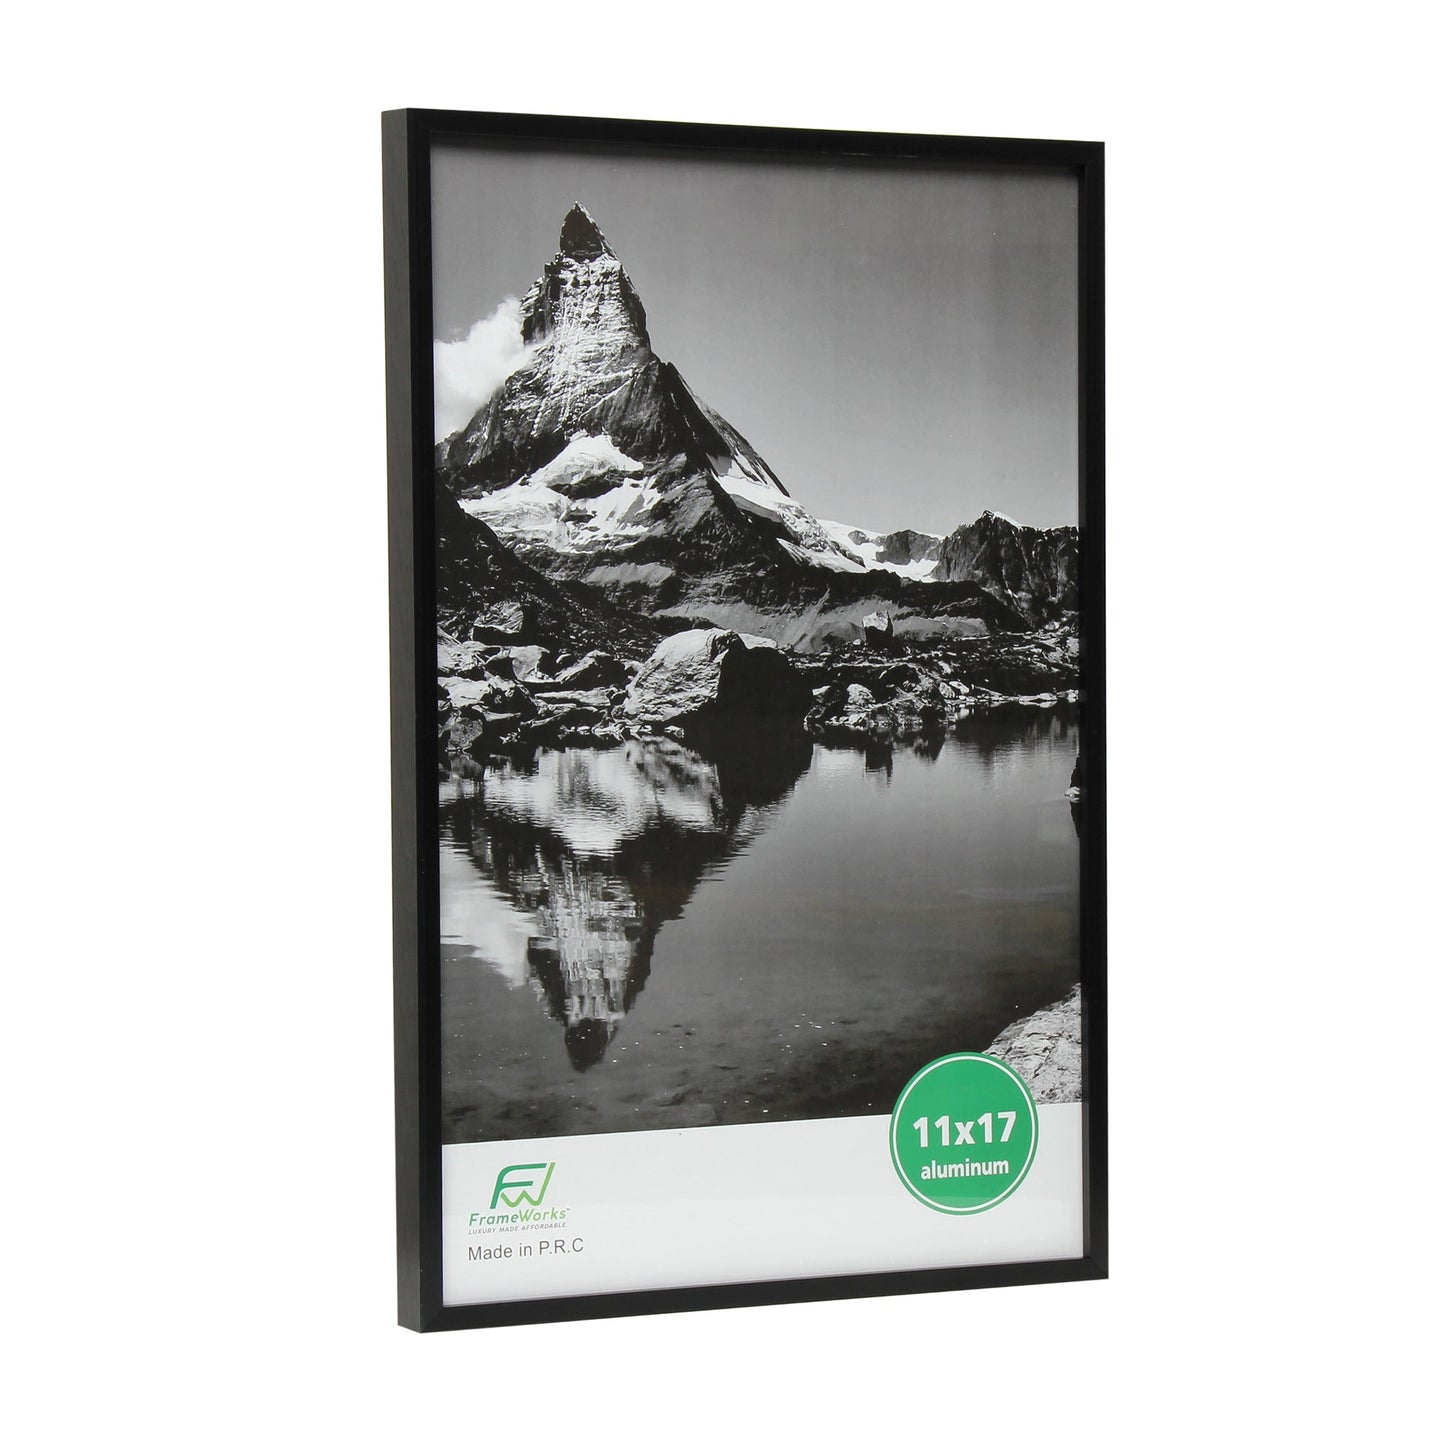 11" x 17" Deluxe Black Aluminum Contemporary Picture Frame with Tempered Glass